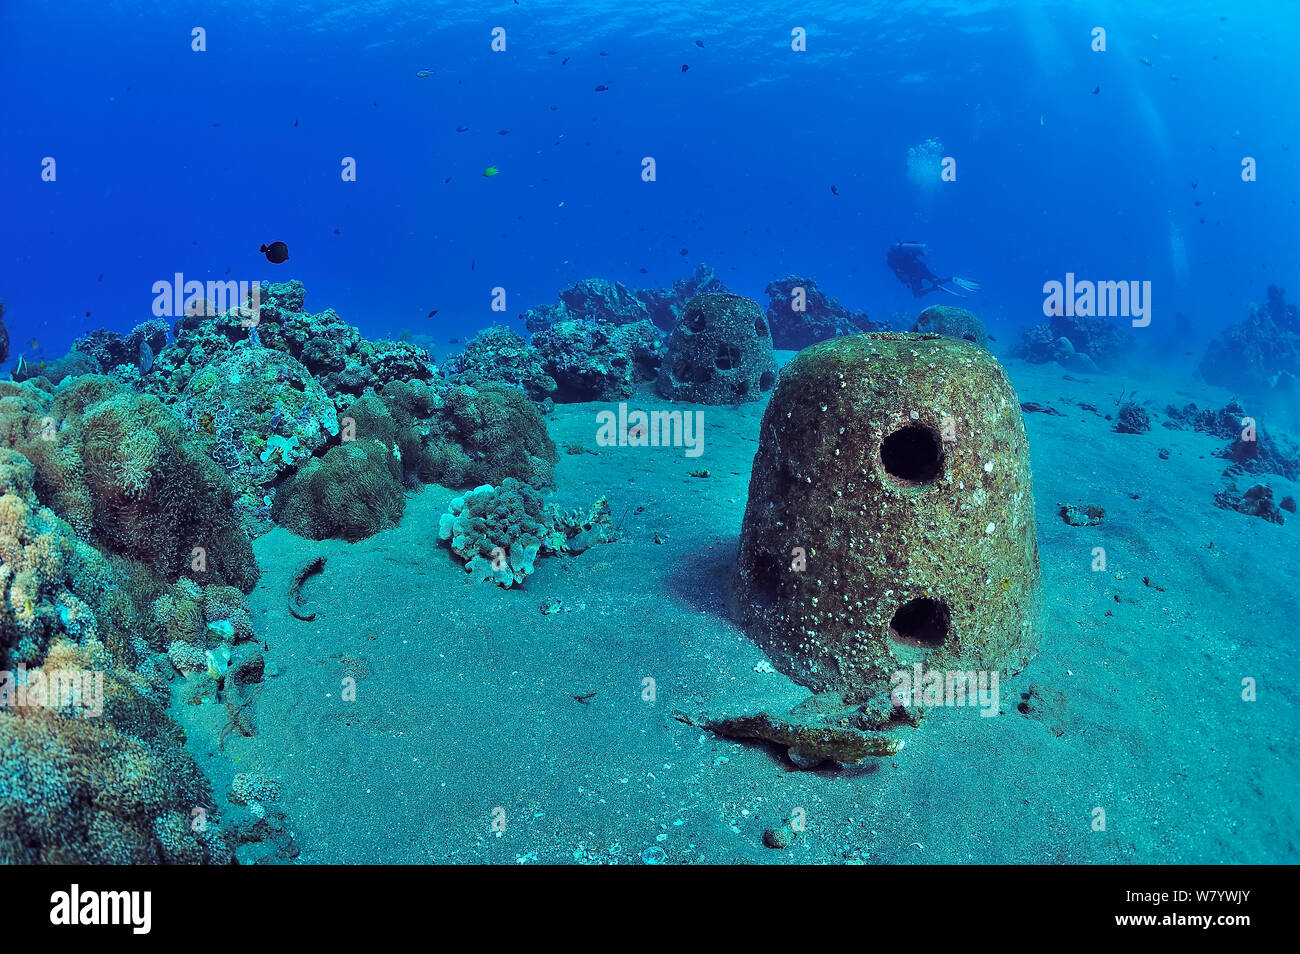 Concrete reef balls sunk to build an artificial reef, Philippines, Sulu Sea. August 2014. Stock Photo